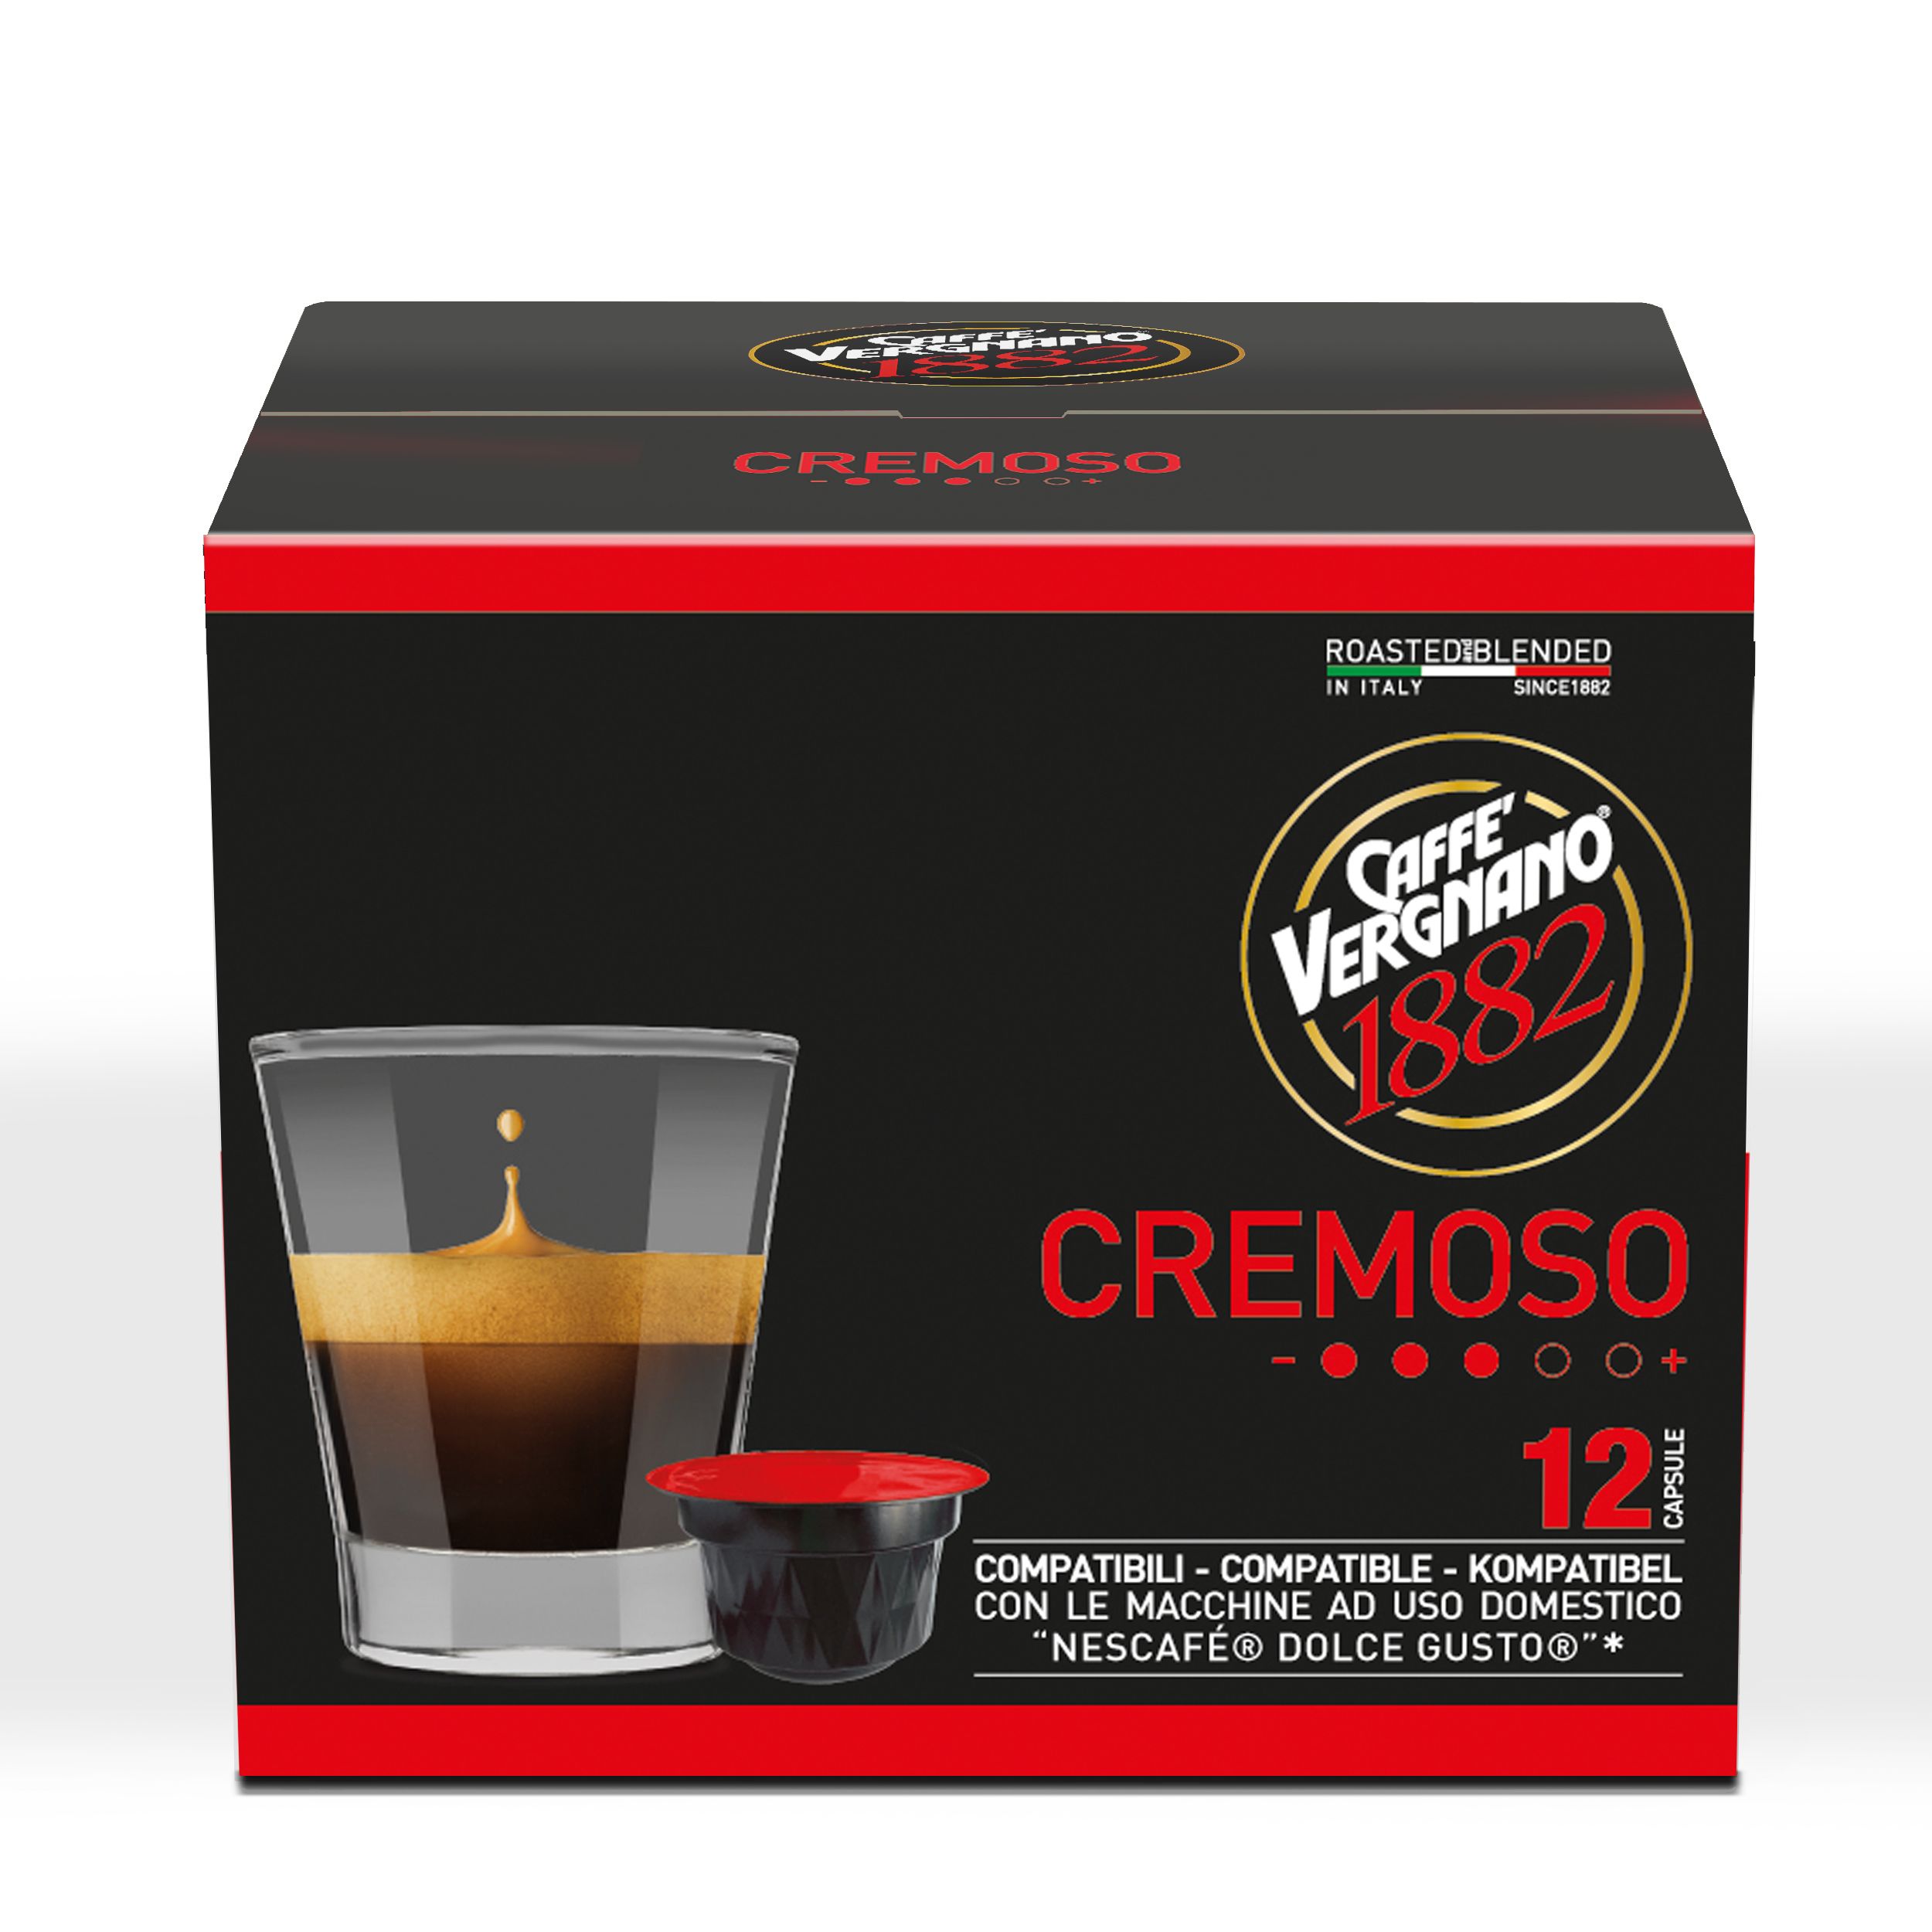 https://www.cialdeweb.it/wp-content/uploads/2020/10/products-dolcegusto-pack-cremoso.jpg